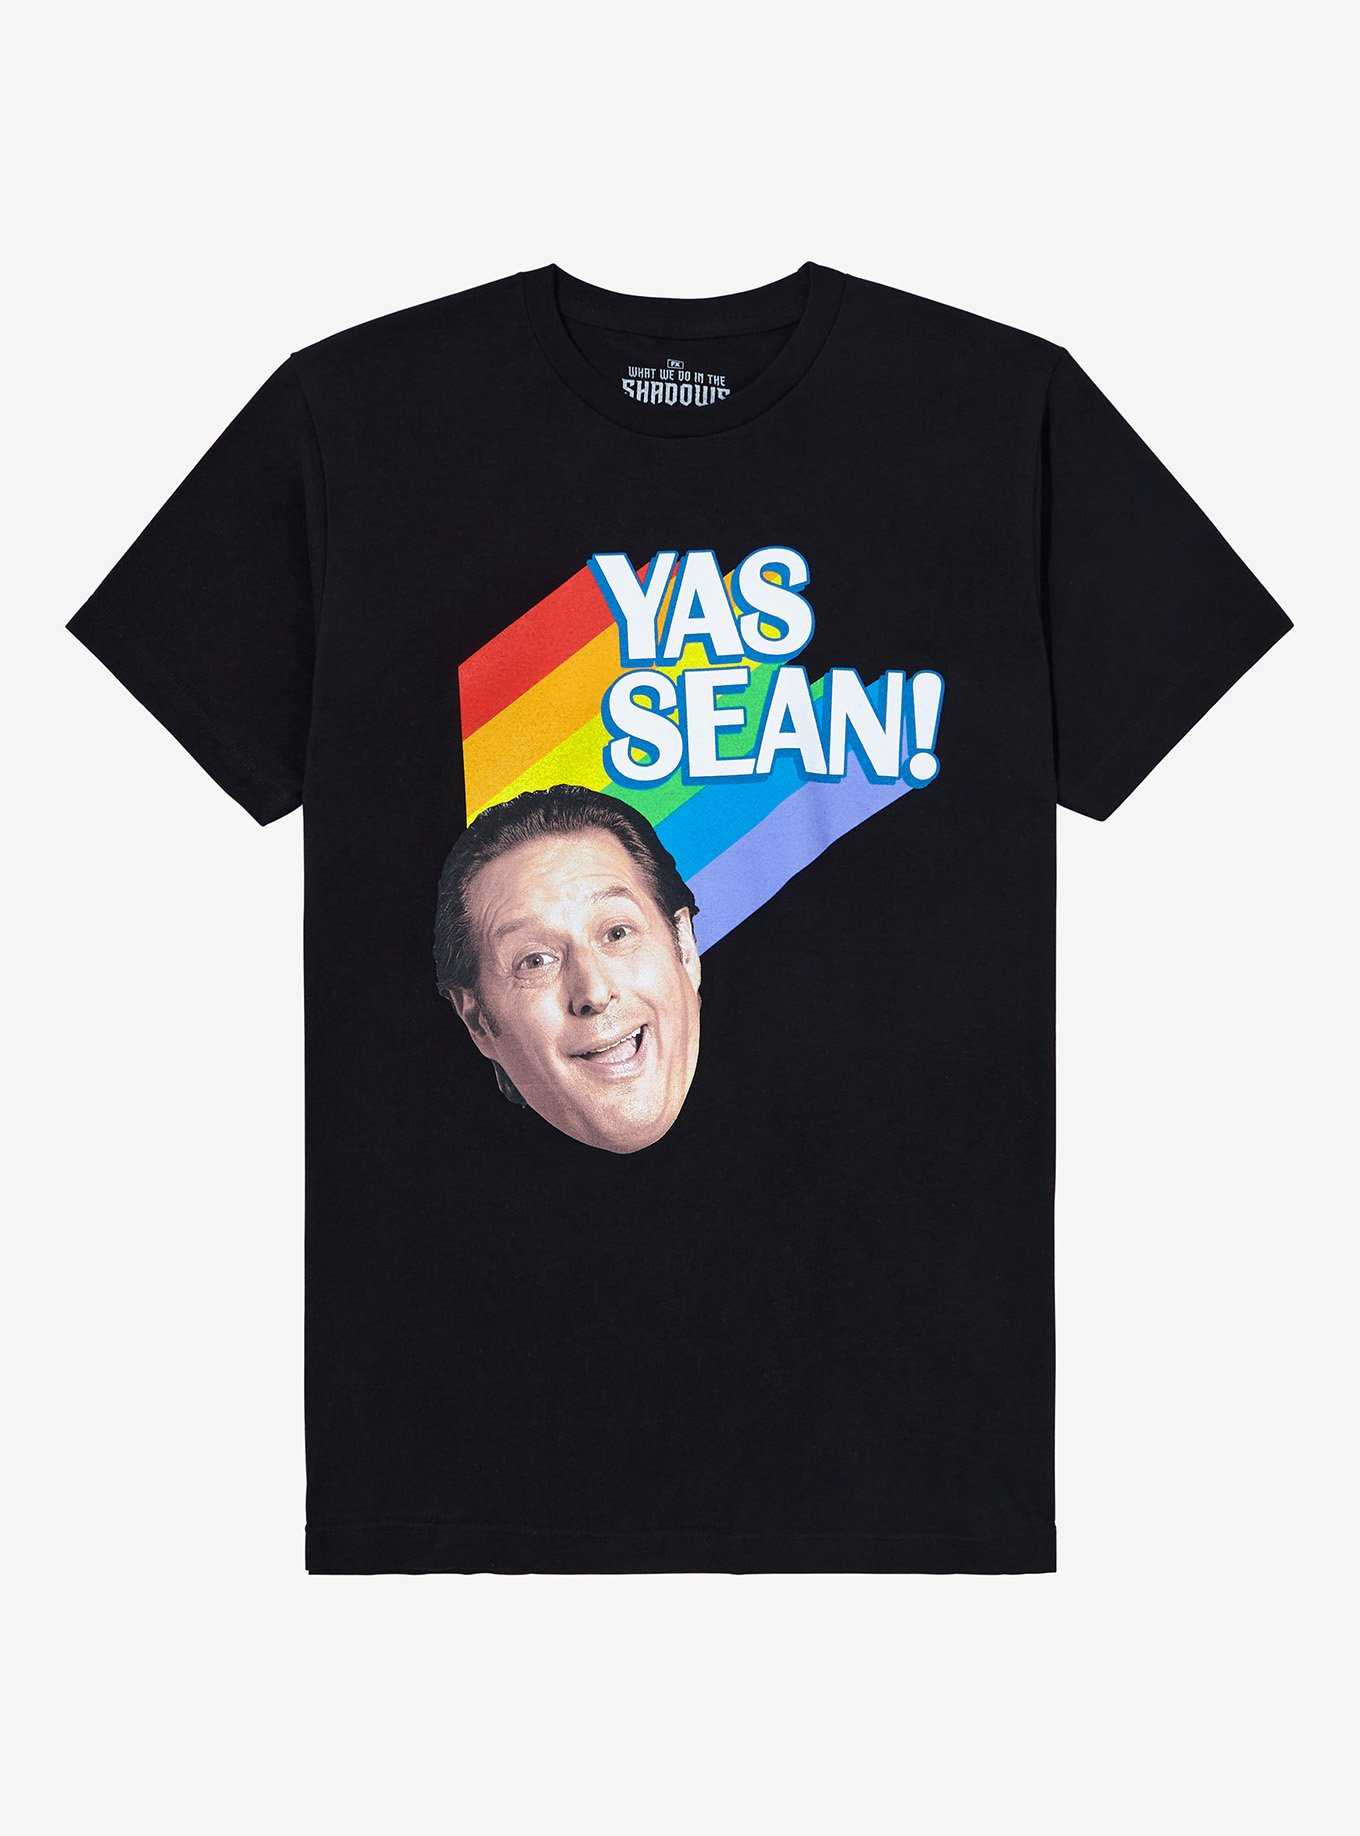 What We Do In The Shadows Yas Sean T-Shirt, , hi-res